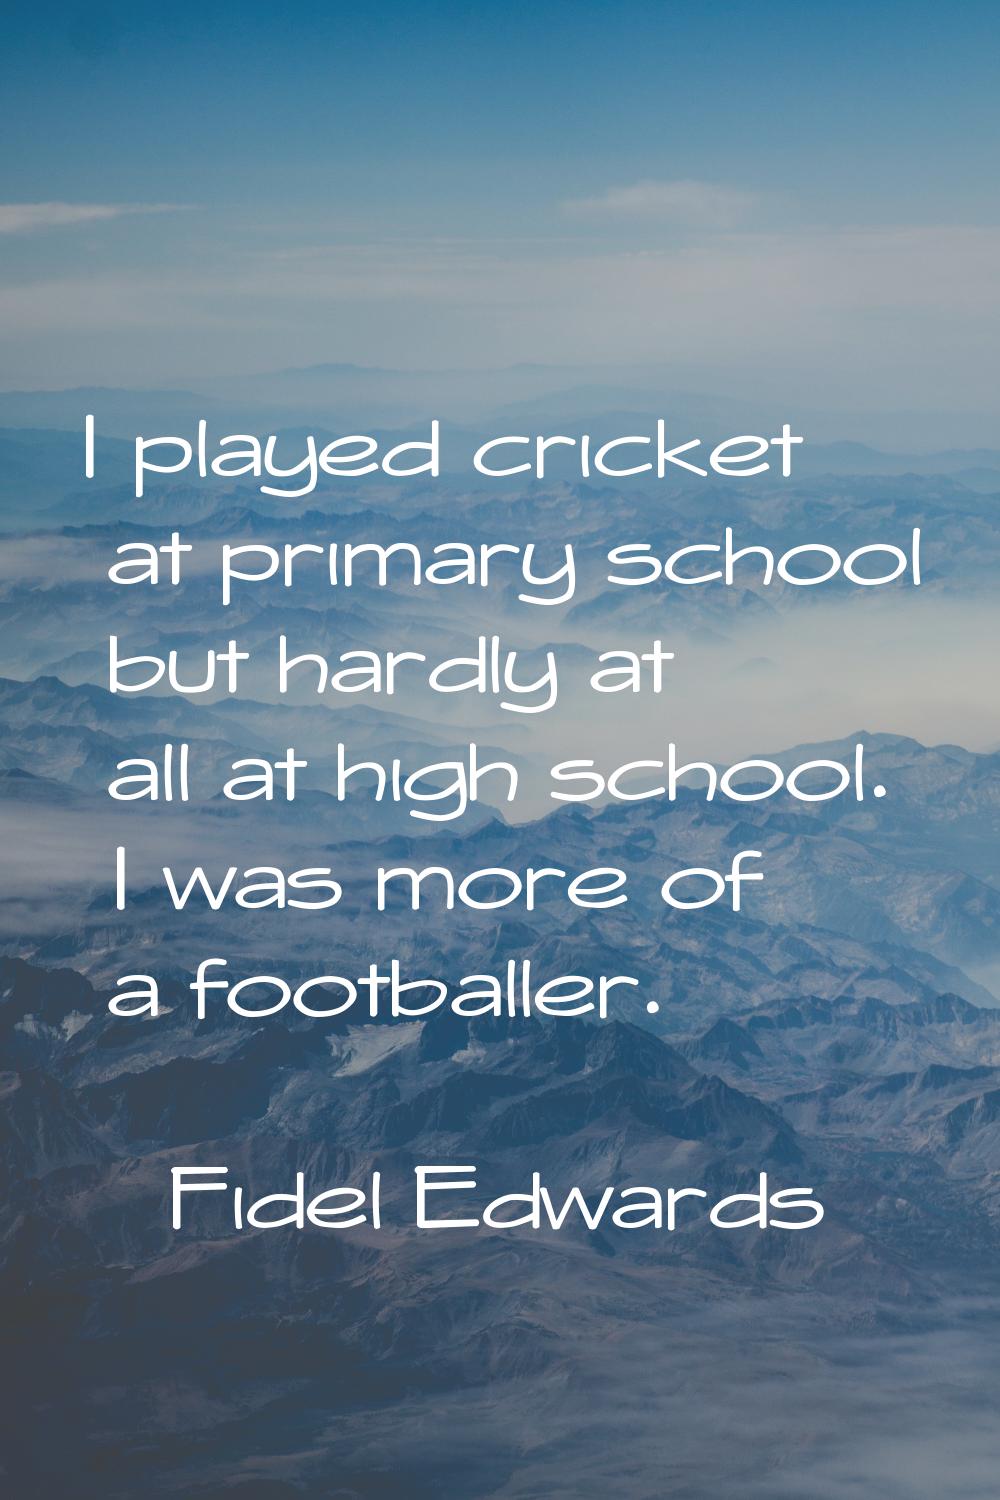 I played cricket at primary school but hardly at all at high school. I was more of a footballer.